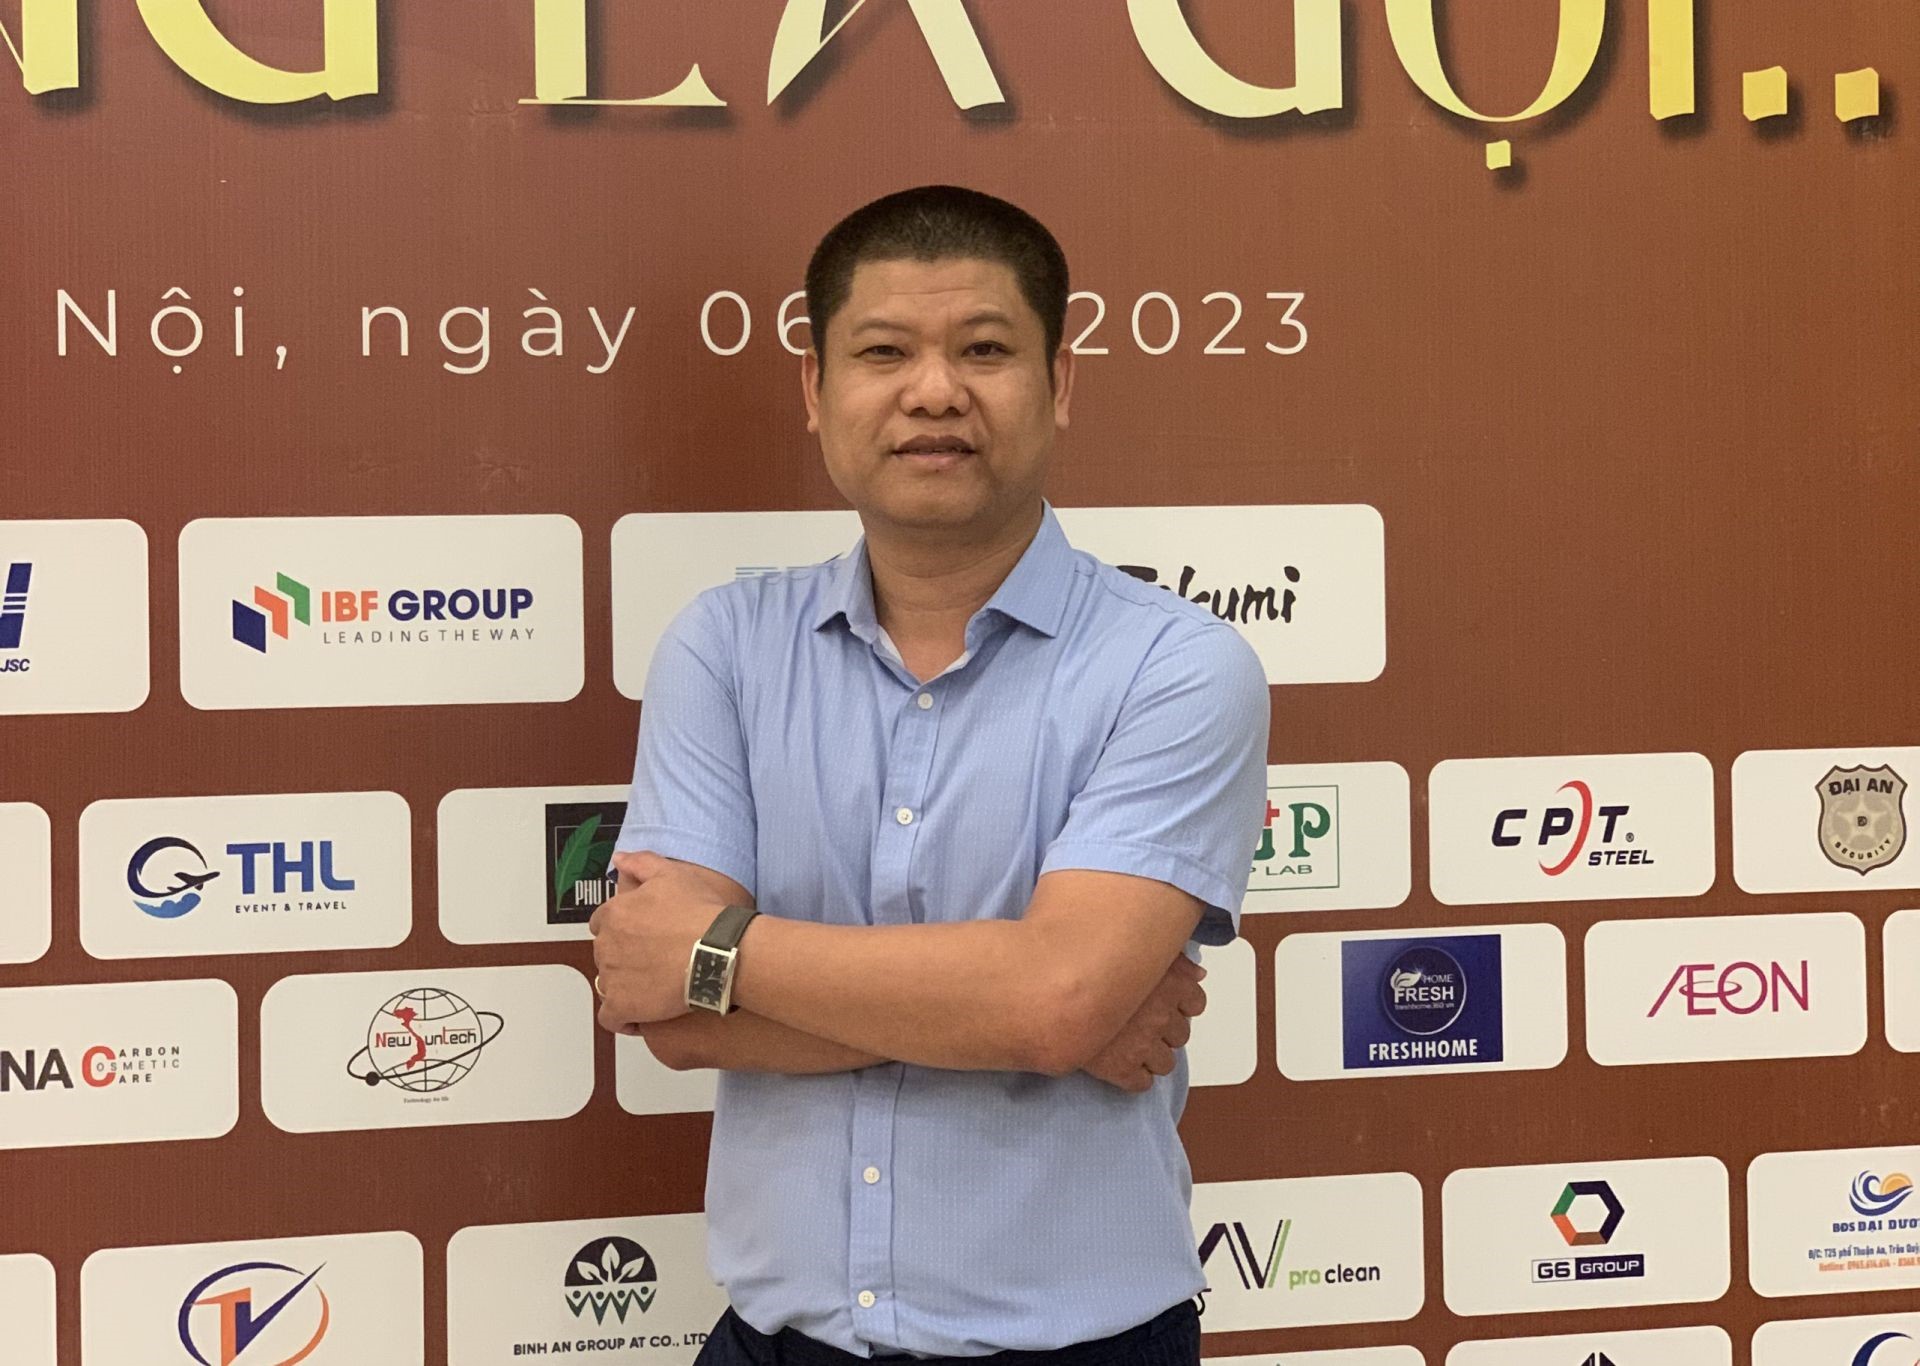 Mr. Hoang Van Linh - Chairman of the Board of Directors of Aligro Joint Stock Company